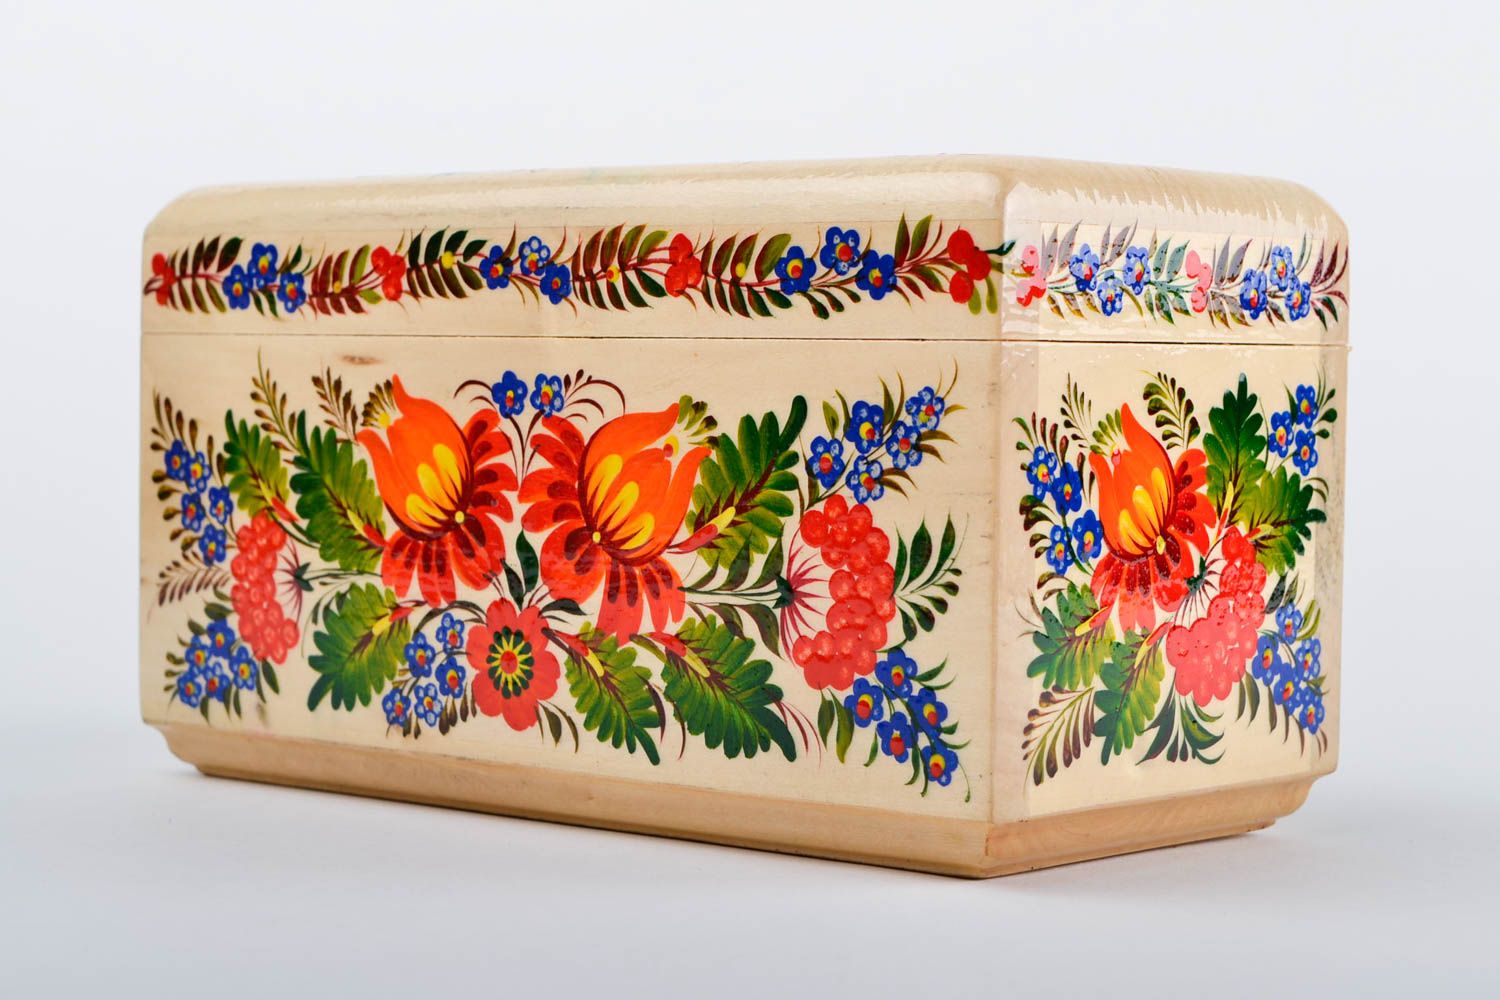 Handmade wooden jewelry box jewelry organizer folk arts and crafts gifts for her photo 3